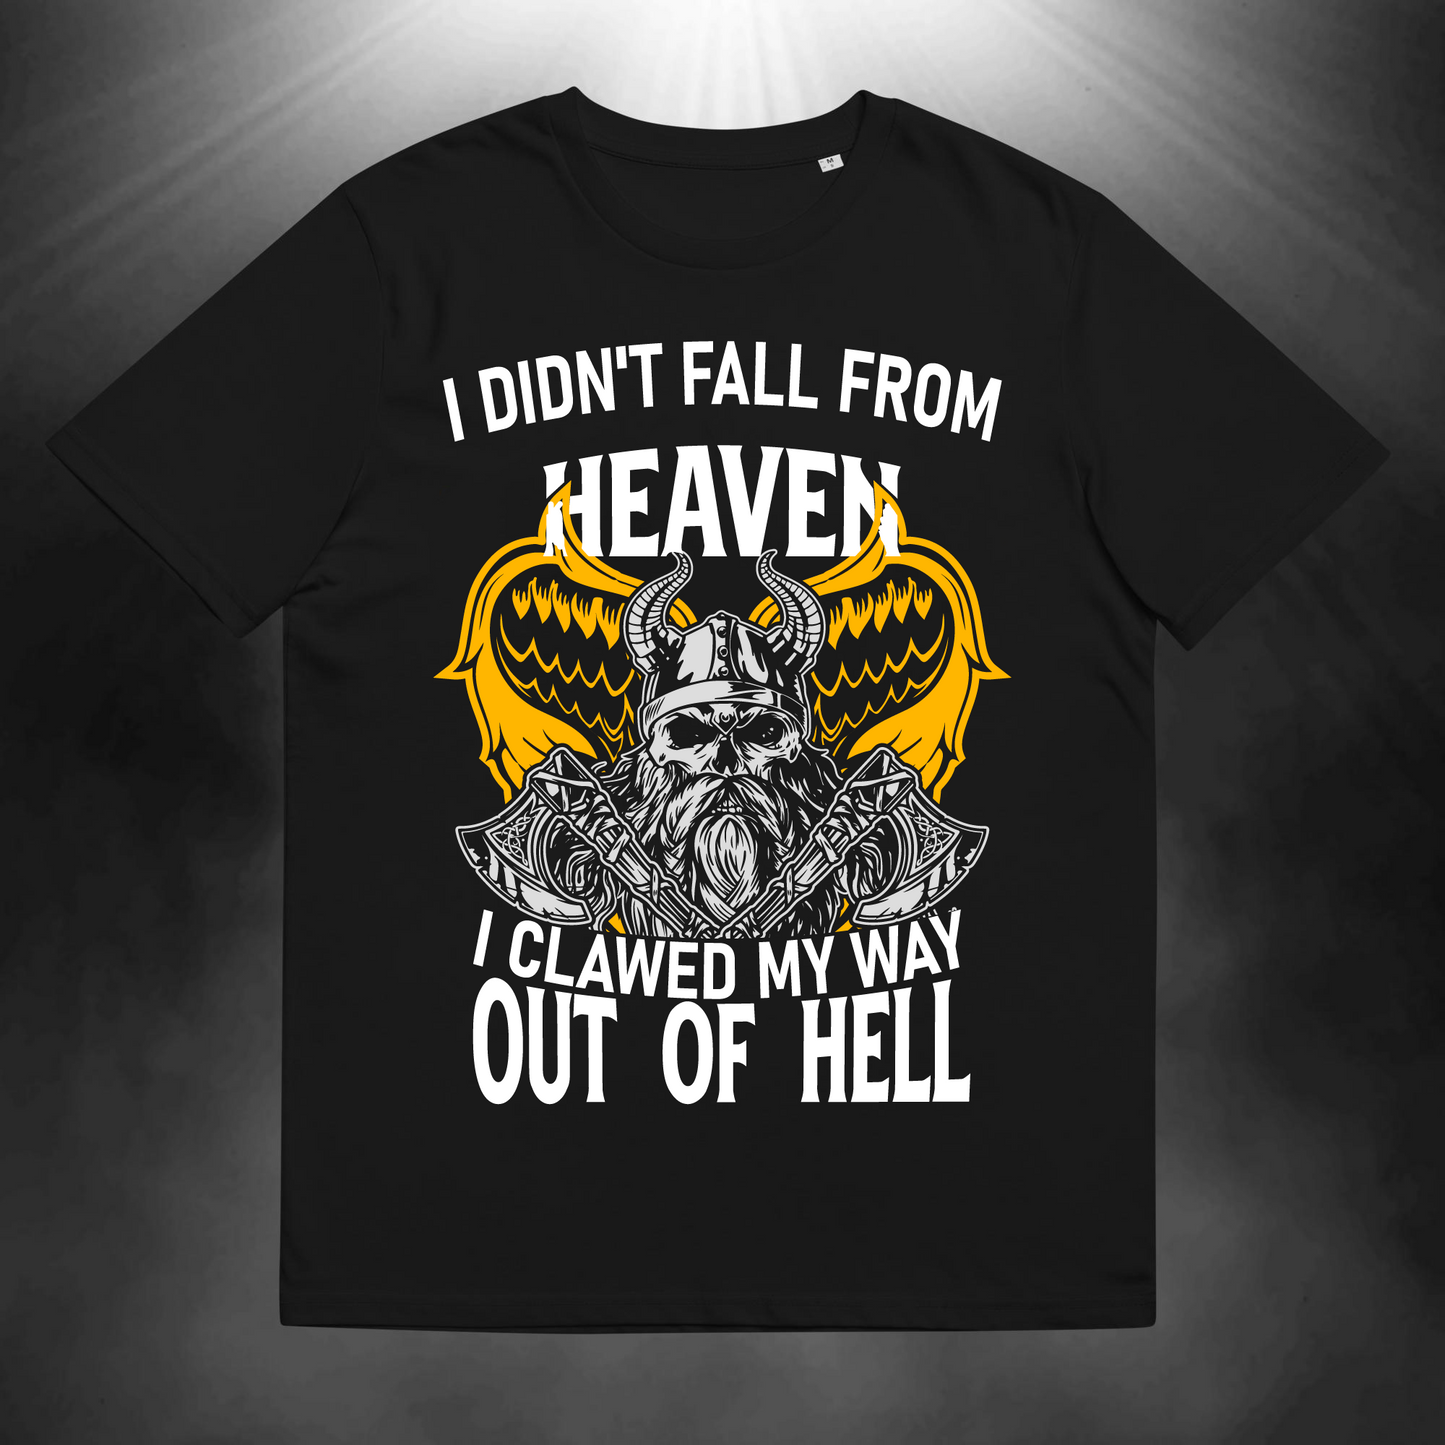 Out of Hell